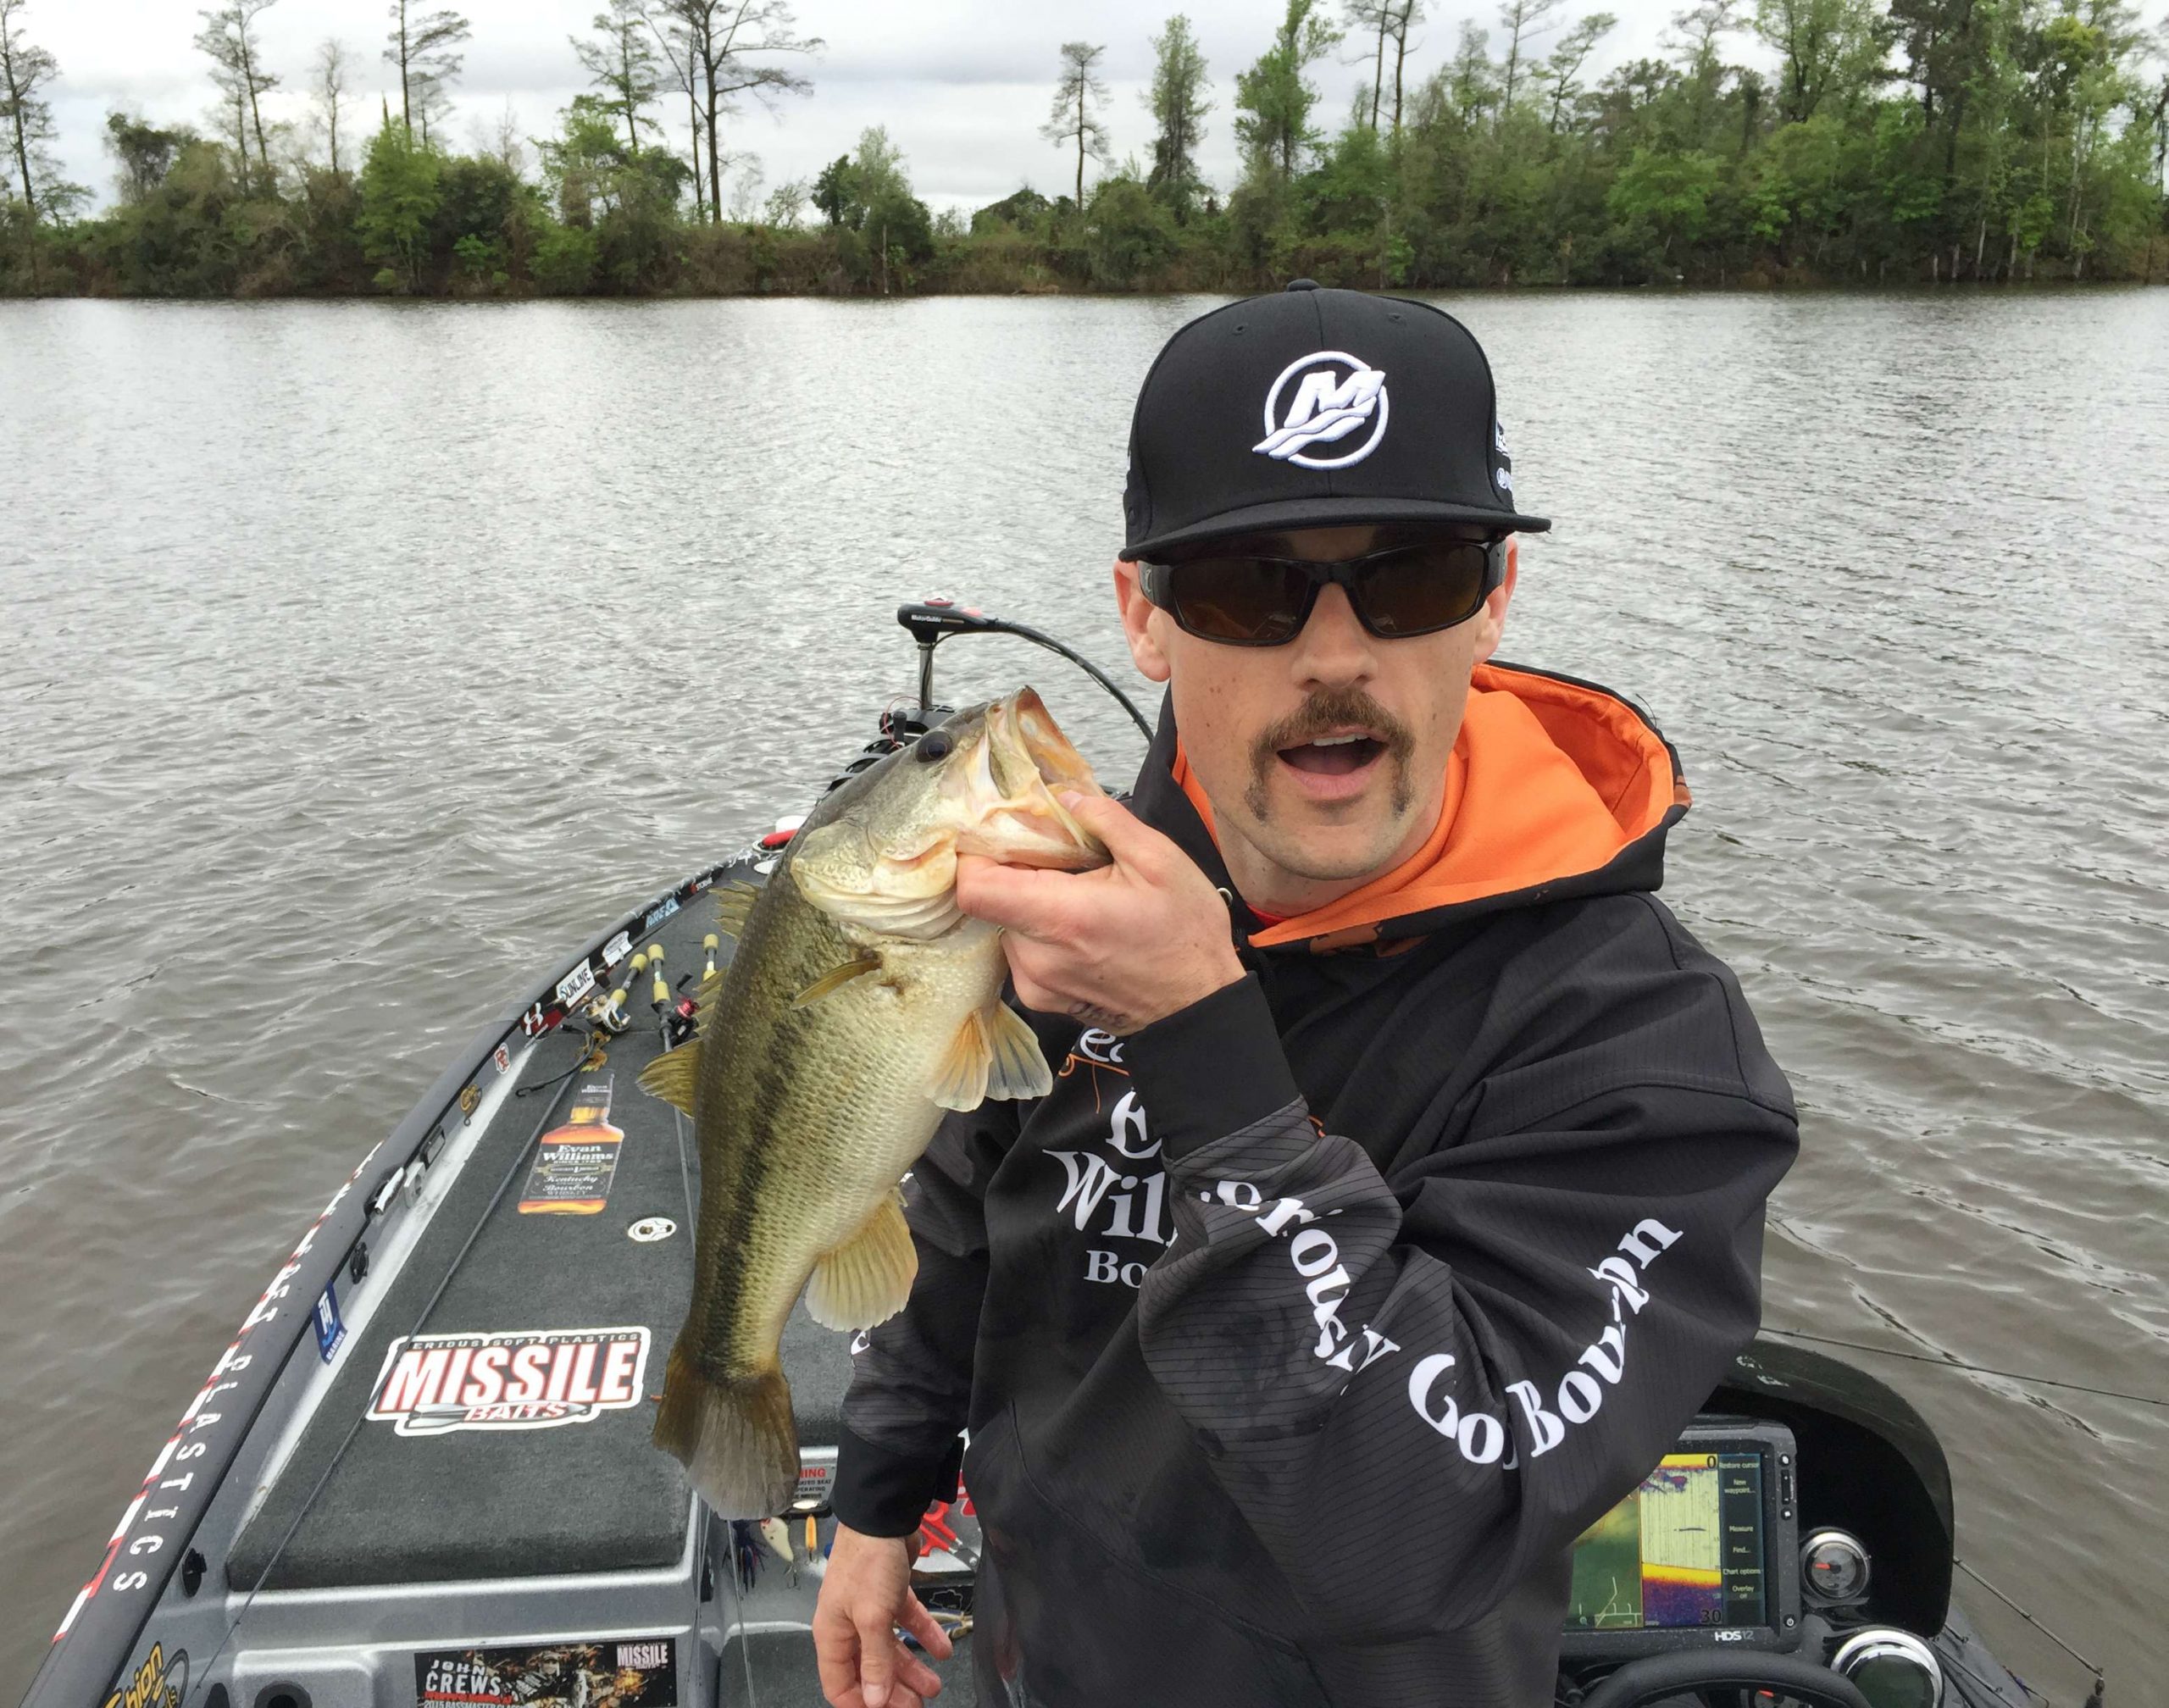 John Crews with a nice one on Day 4.
<br>Photo by Bassmaster Marshal Cody Smith